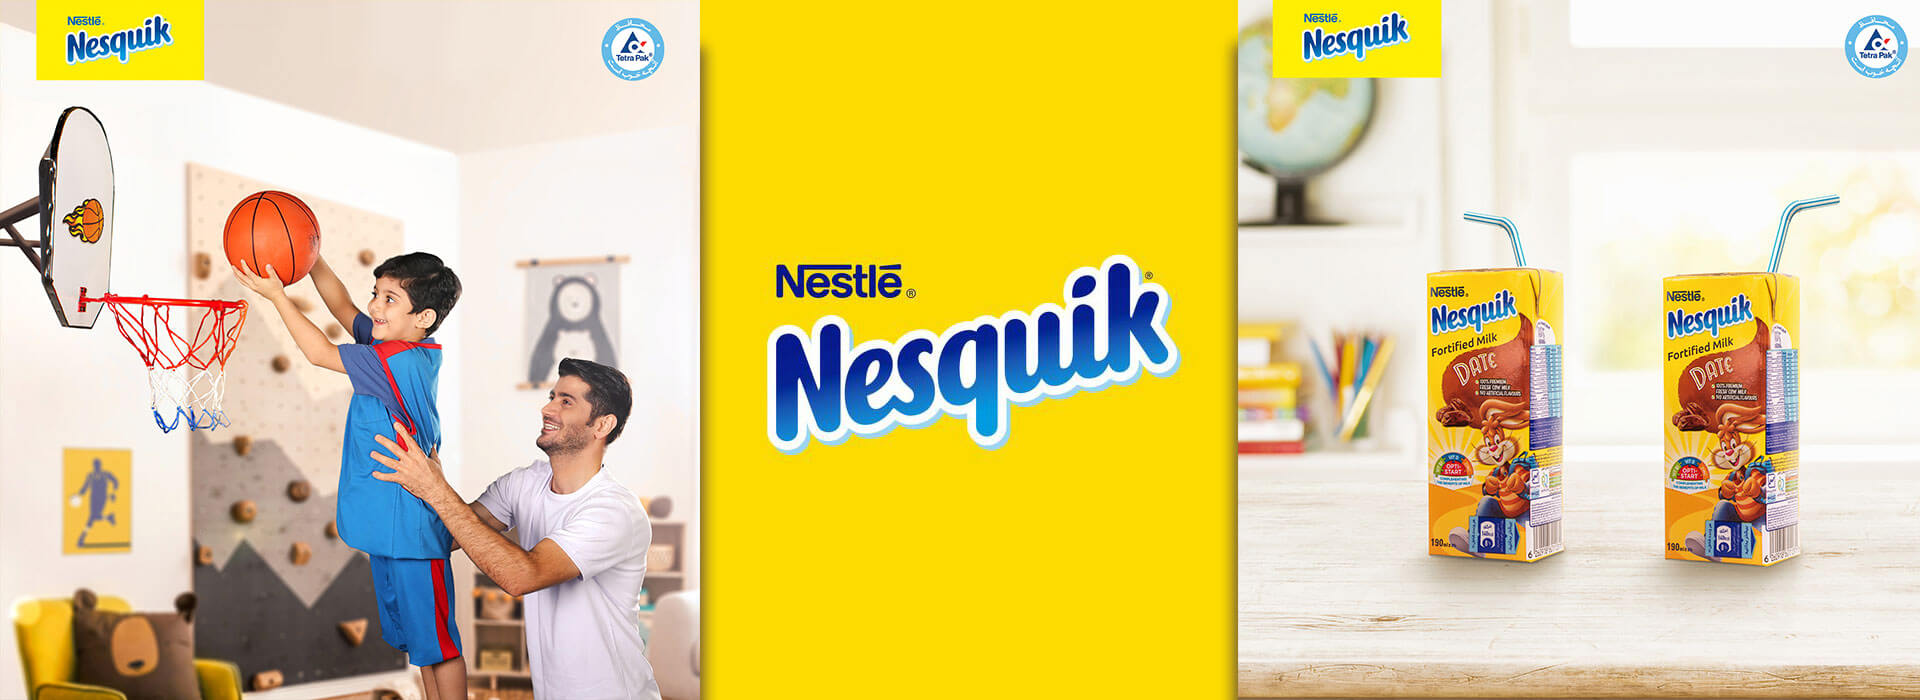 Netbina and Nesquik work towards a brighter future with stronger, smarter kids!